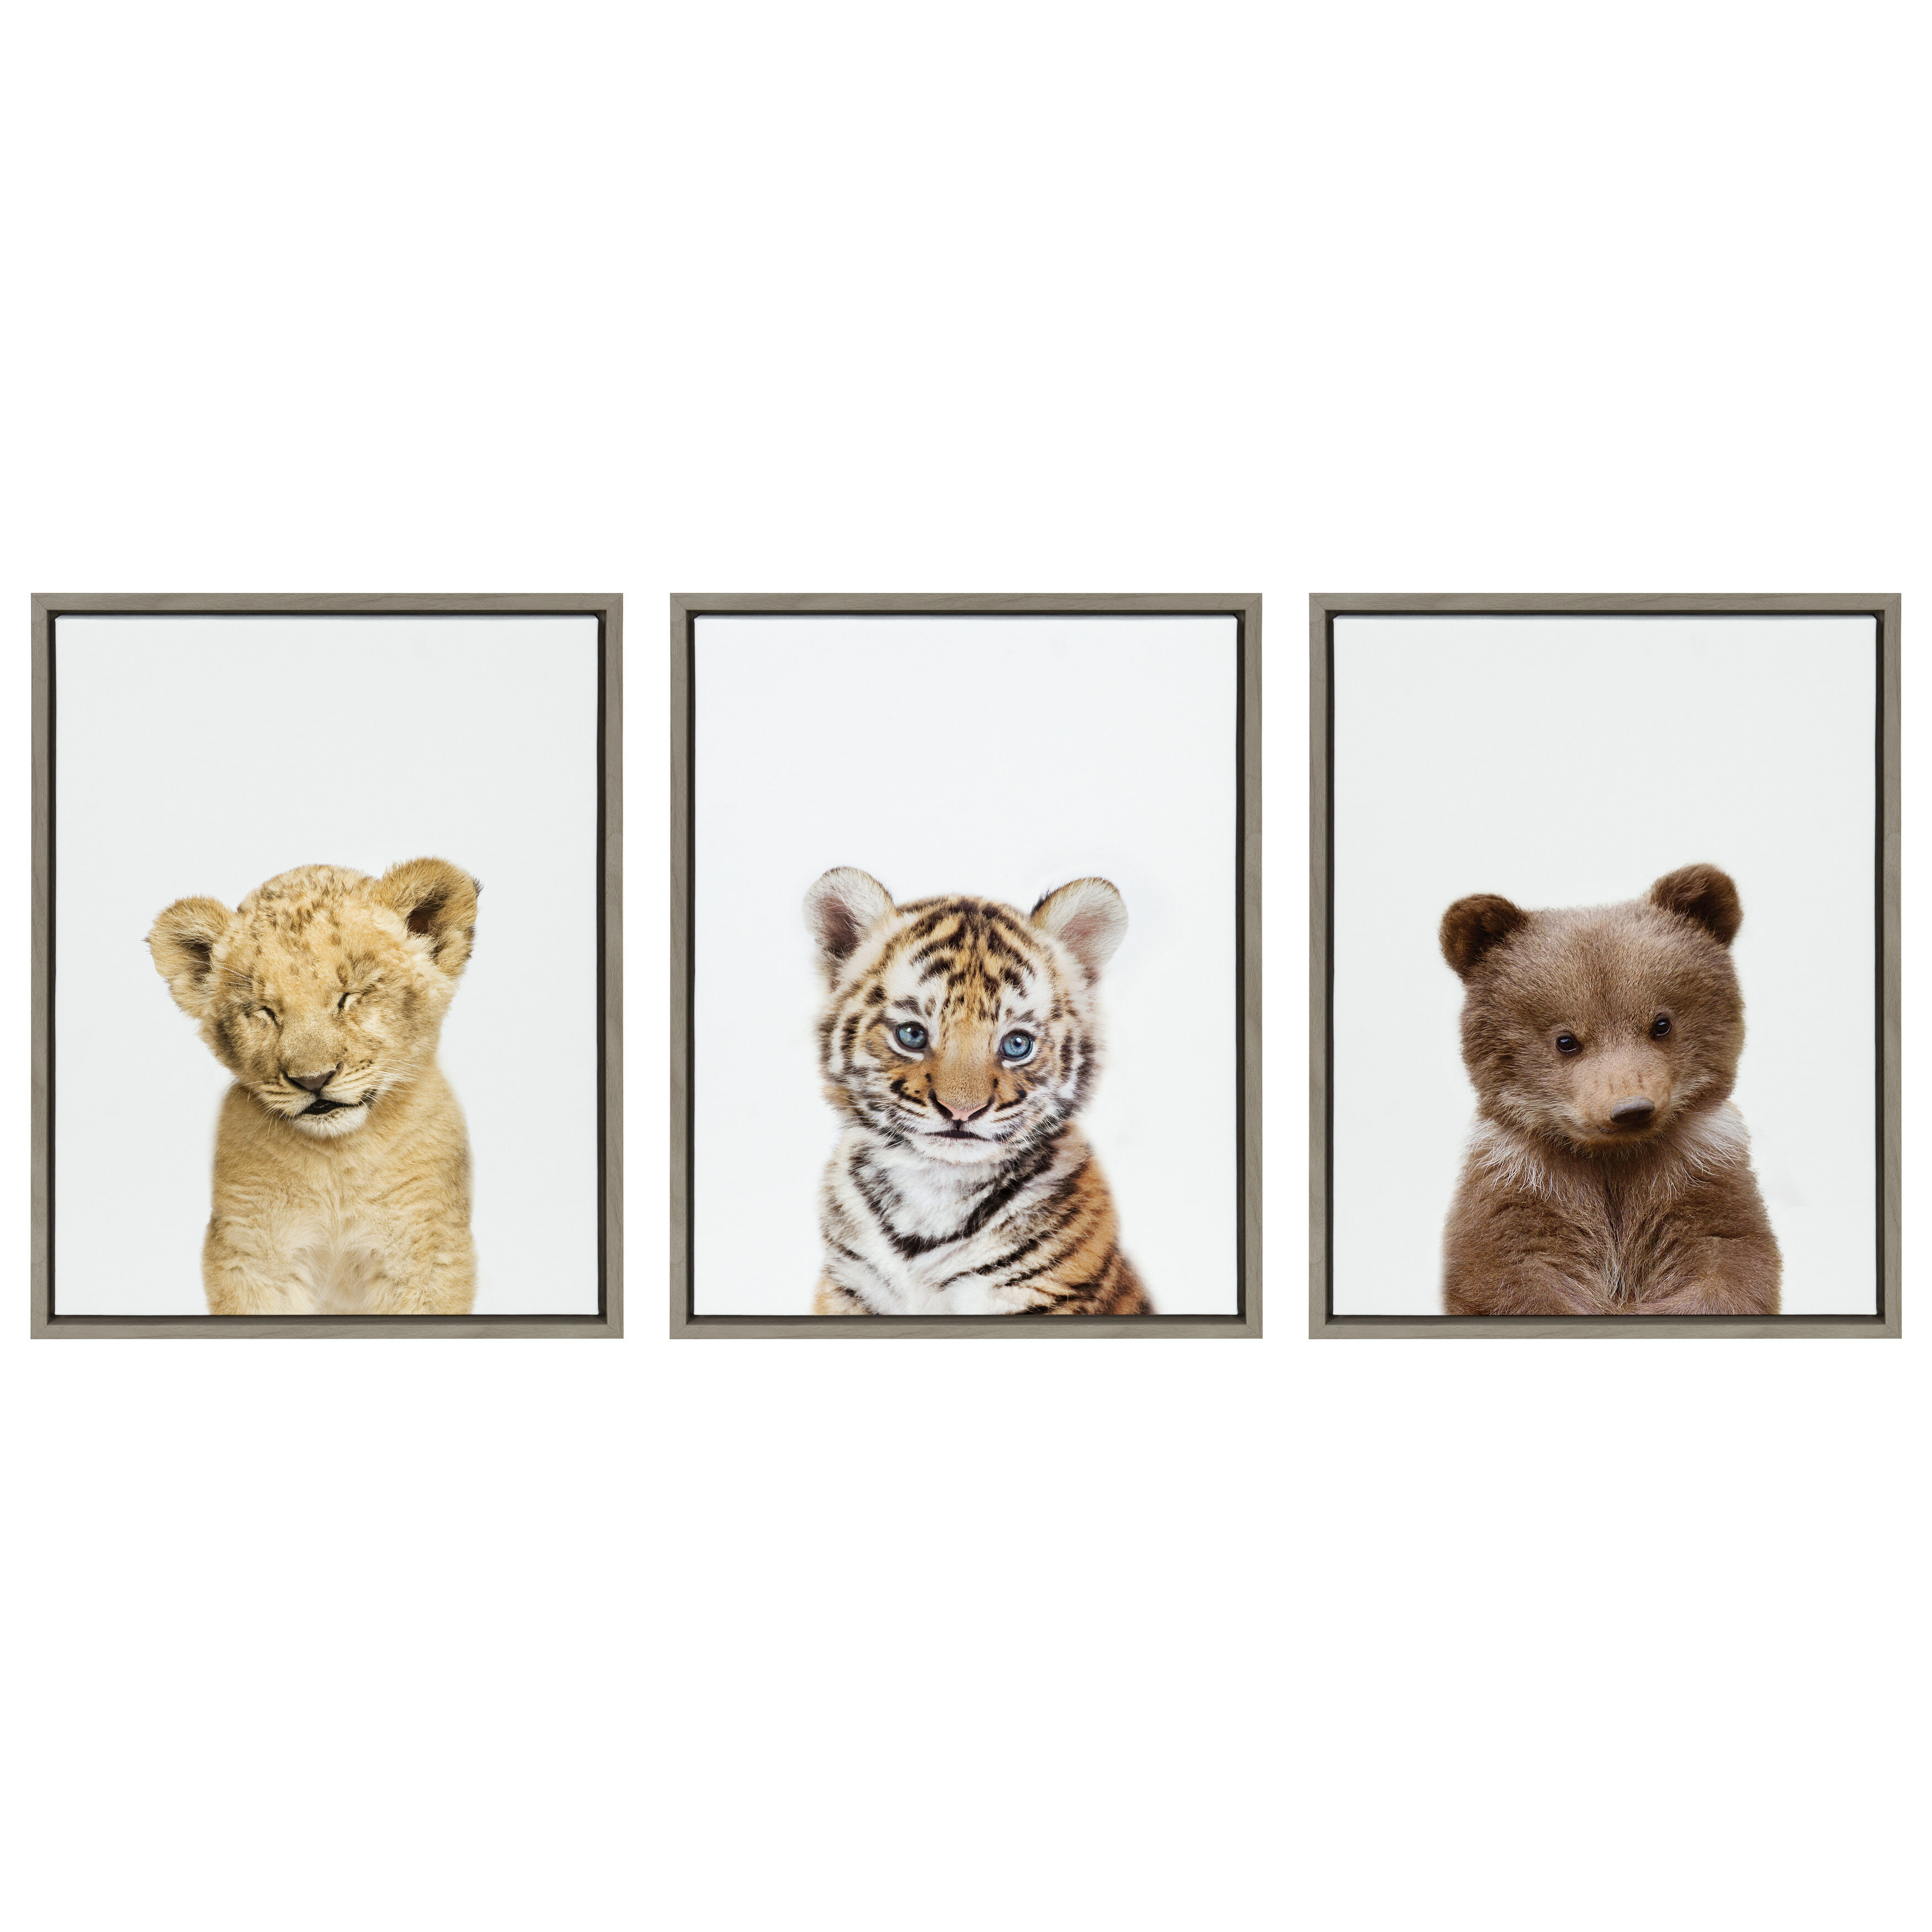 Isabelle Max Animal Studio Sleepy Lion Baby Tiger Portrait Animal Studio Bear By Amy Peterson Floater Frame Graphic Art Print On Canvas Wayfair